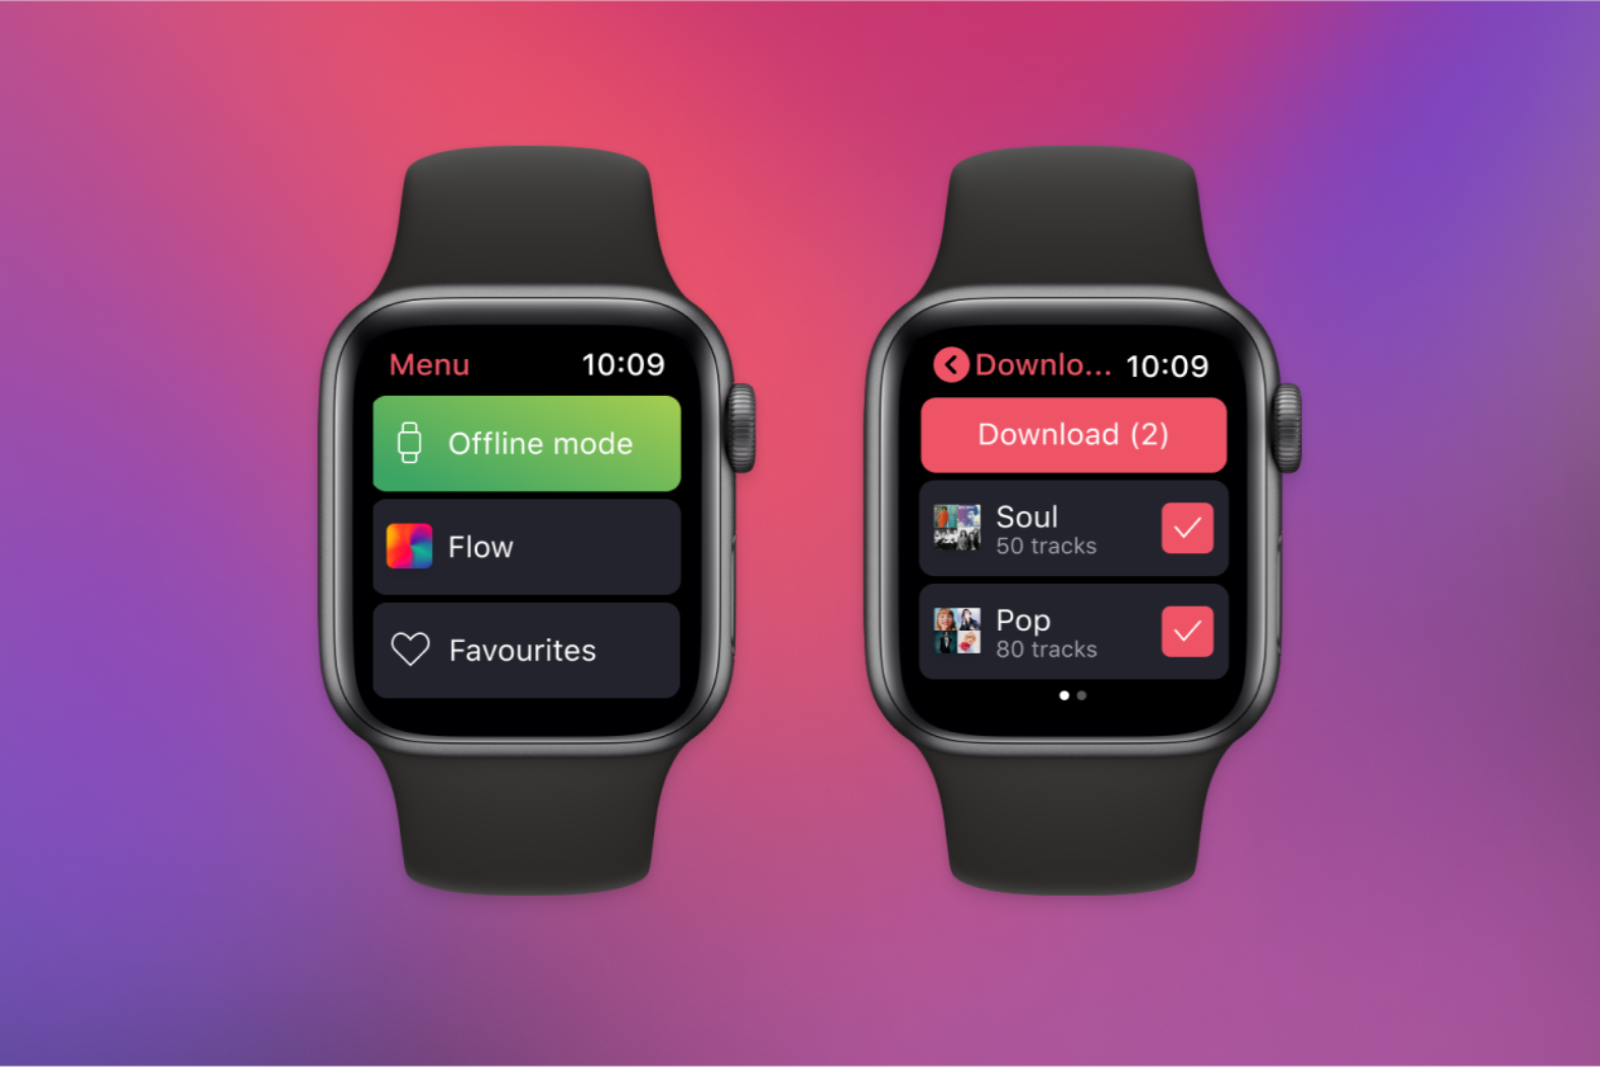 Deezer says you can now download music on its Apple Watch app photo 1